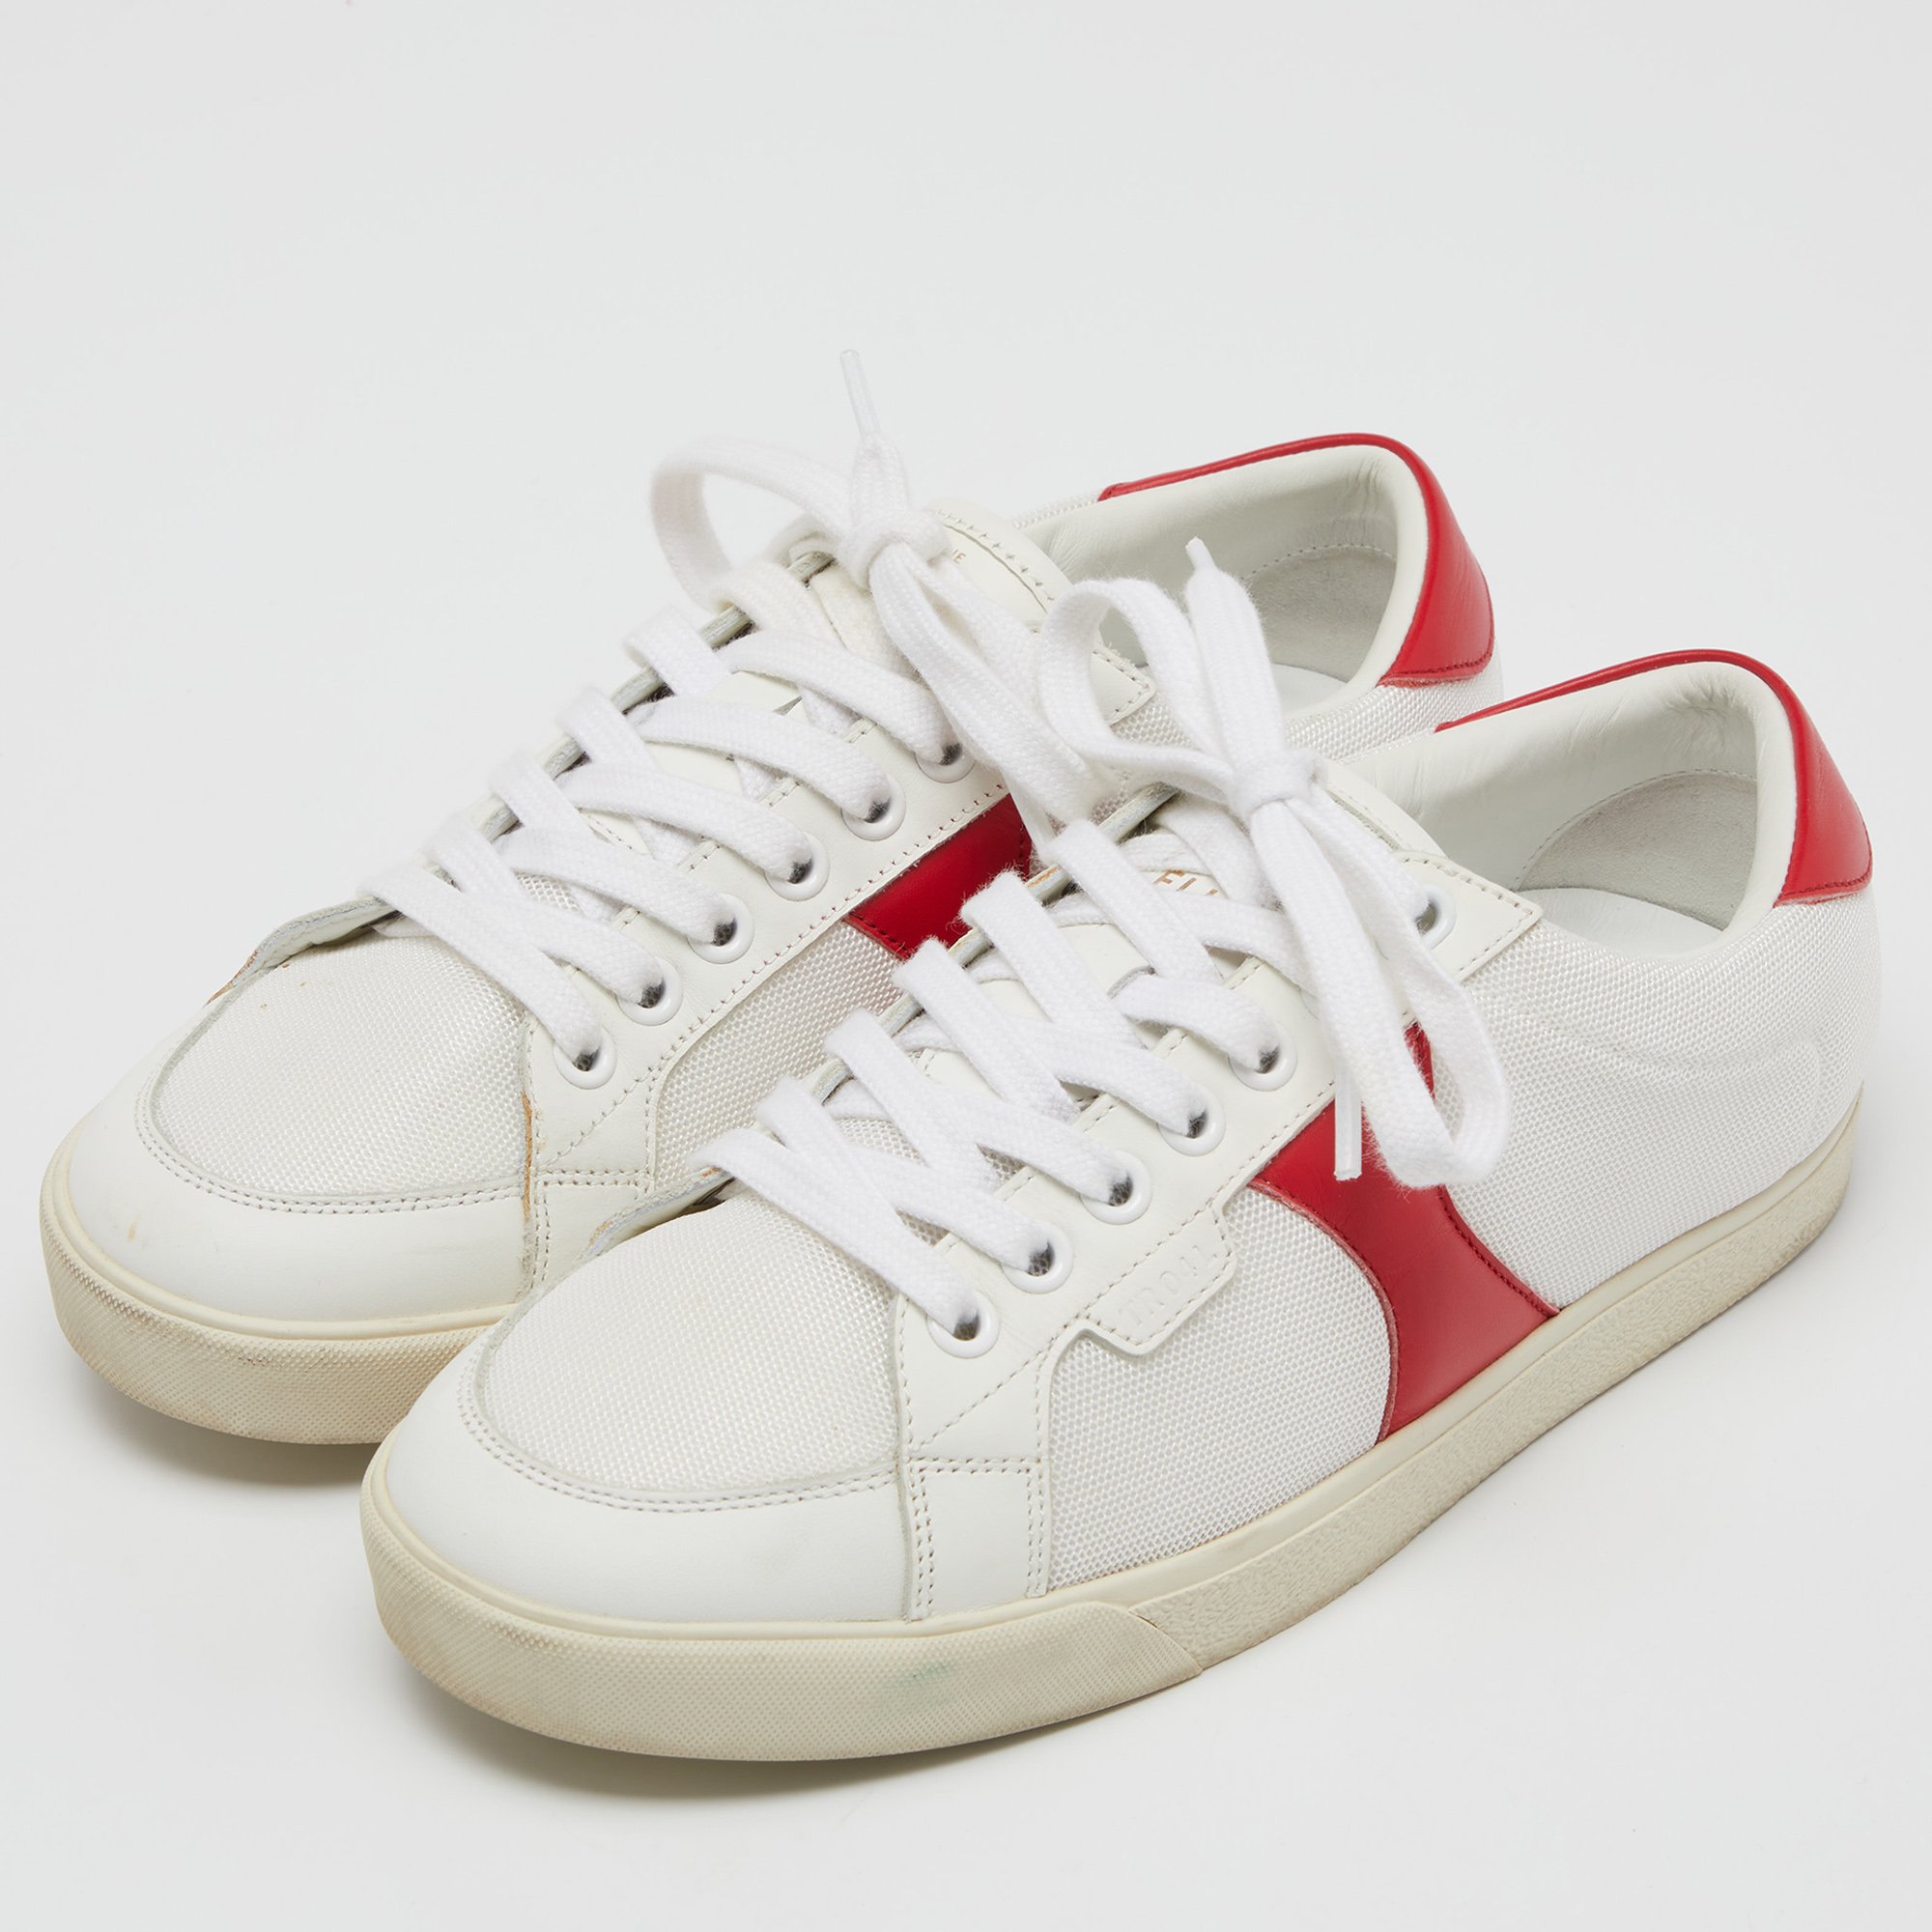 

Celine White/Red Leather Colorblock Pattern Low Top Sneakers Size